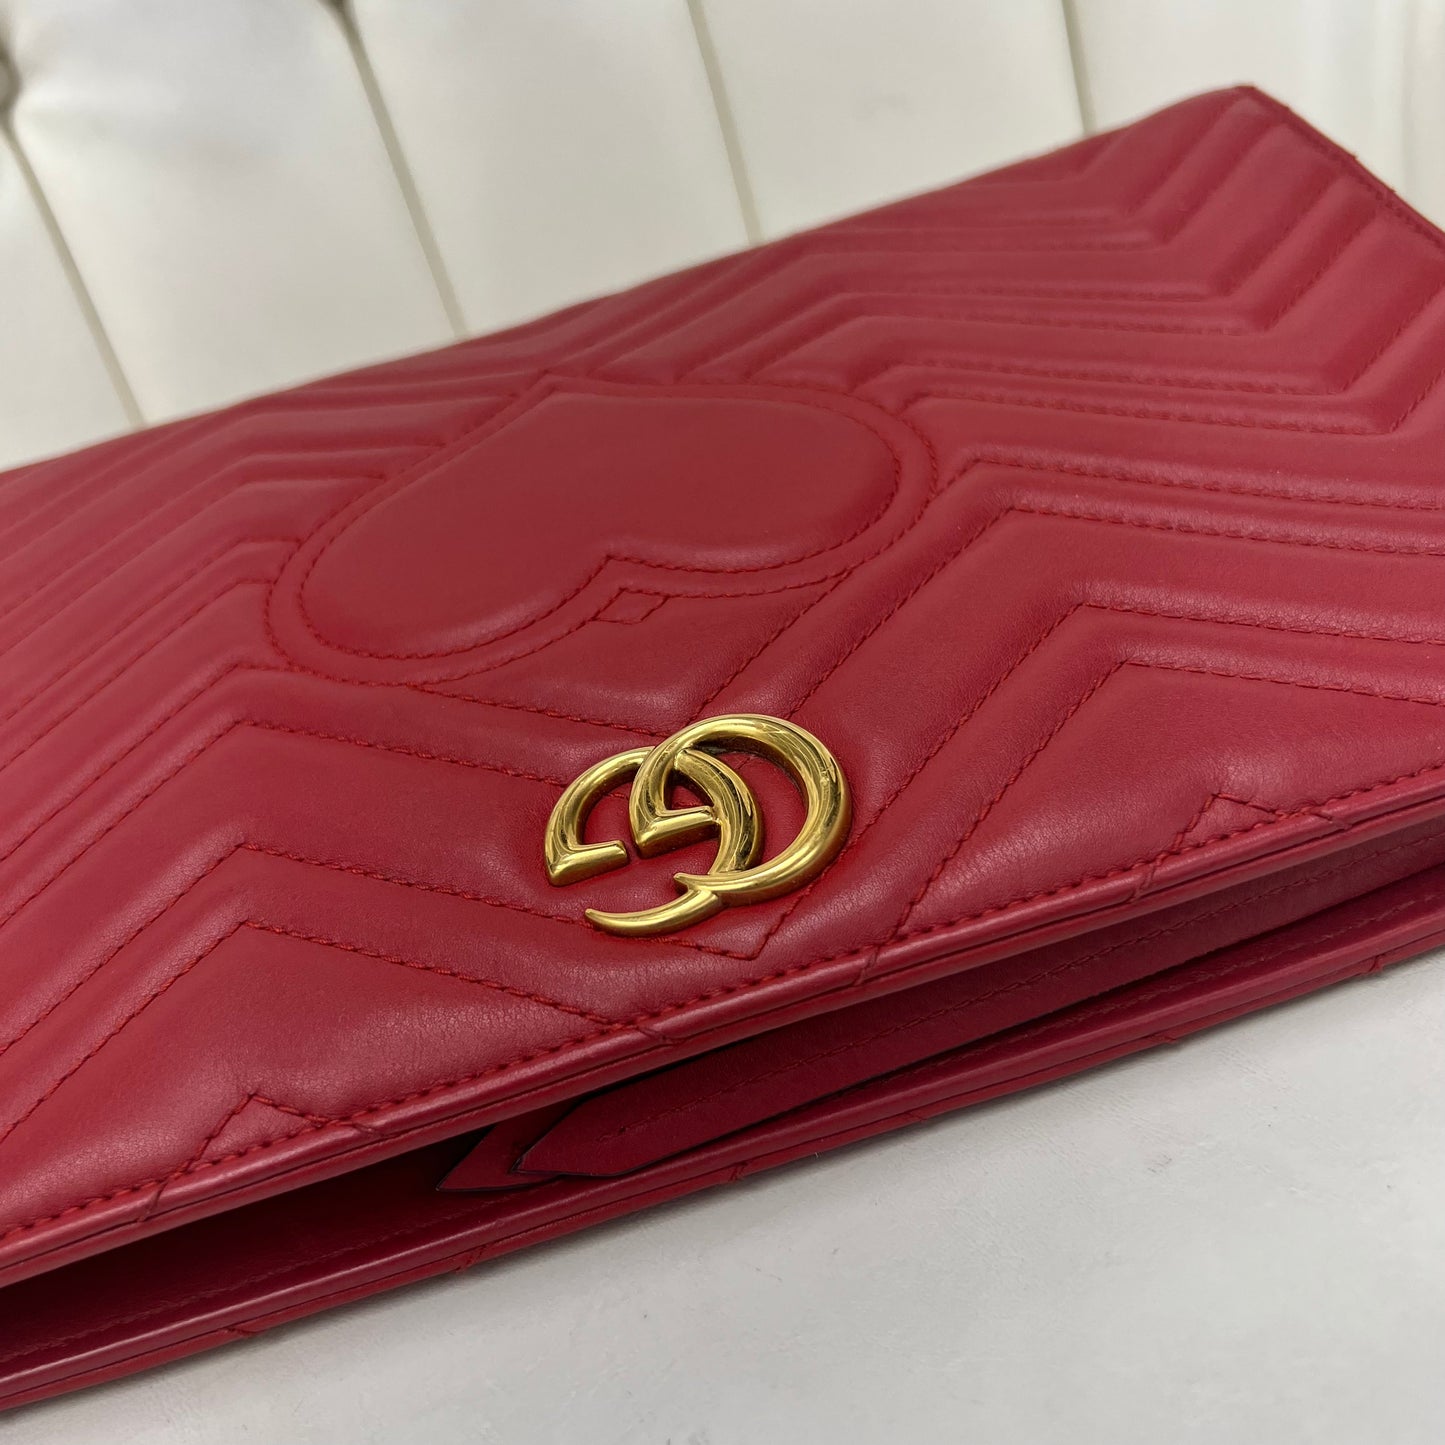 Gucci Red Marmont Clutch